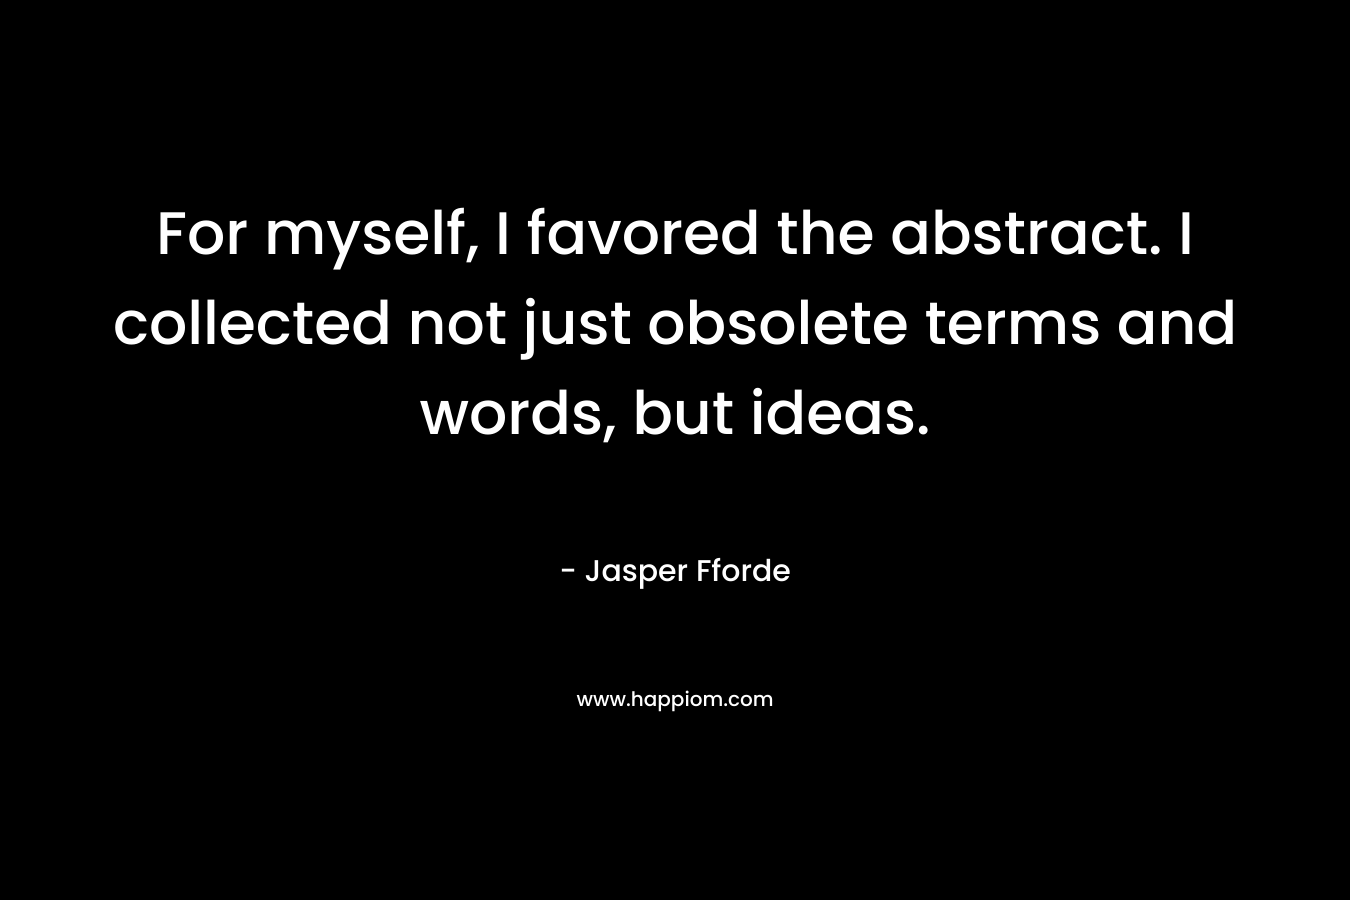 For myself, I favored the abstract. I collected not just obsolete terms and words, but ideas.